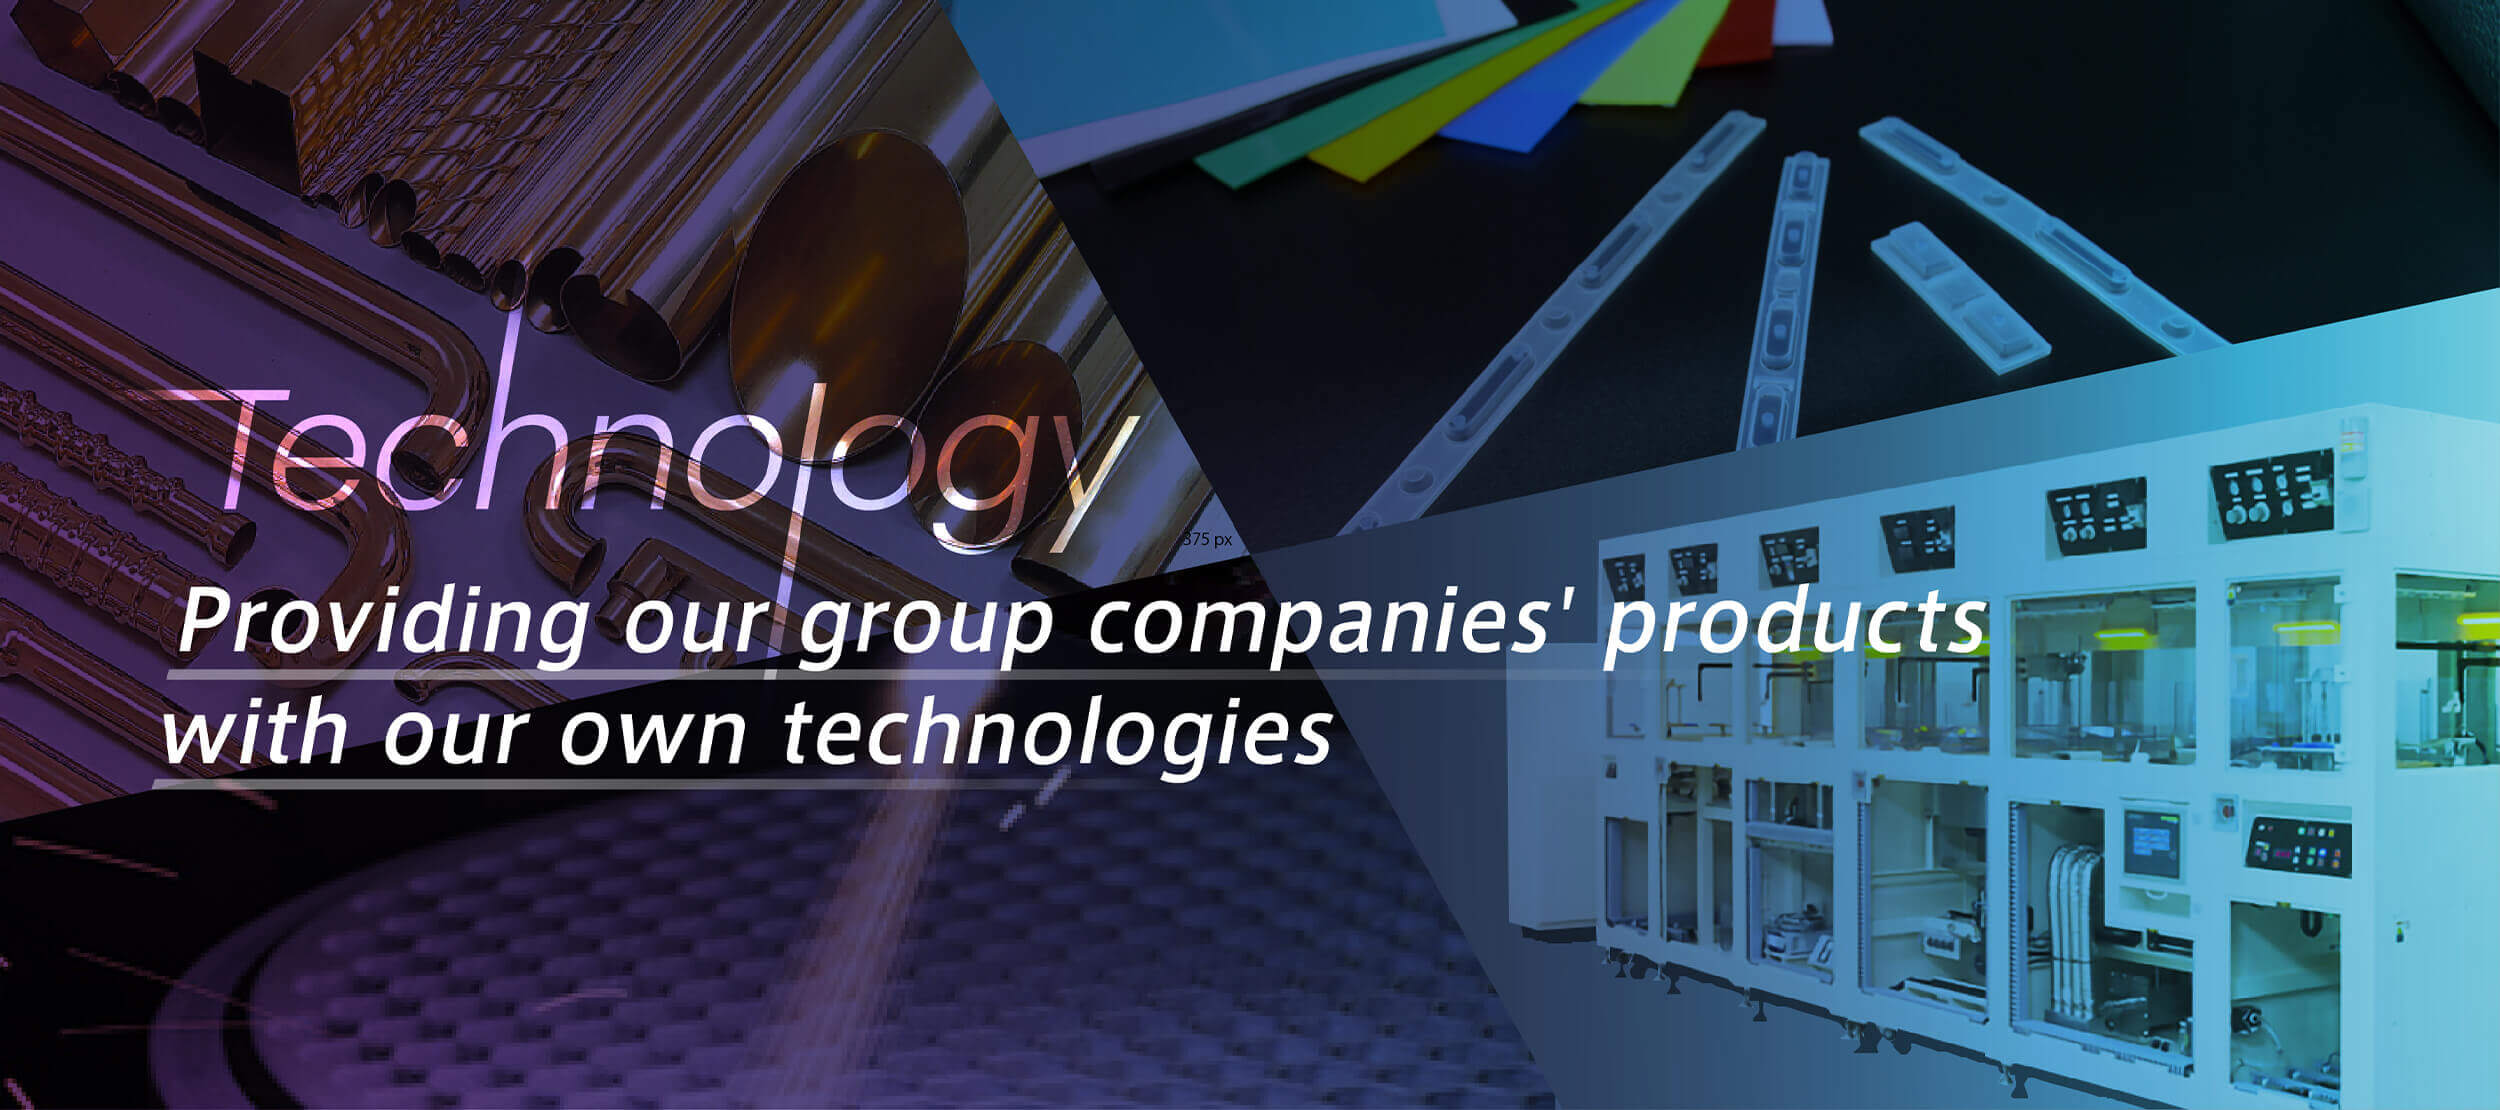 Providing our group companies' products with our own technologies